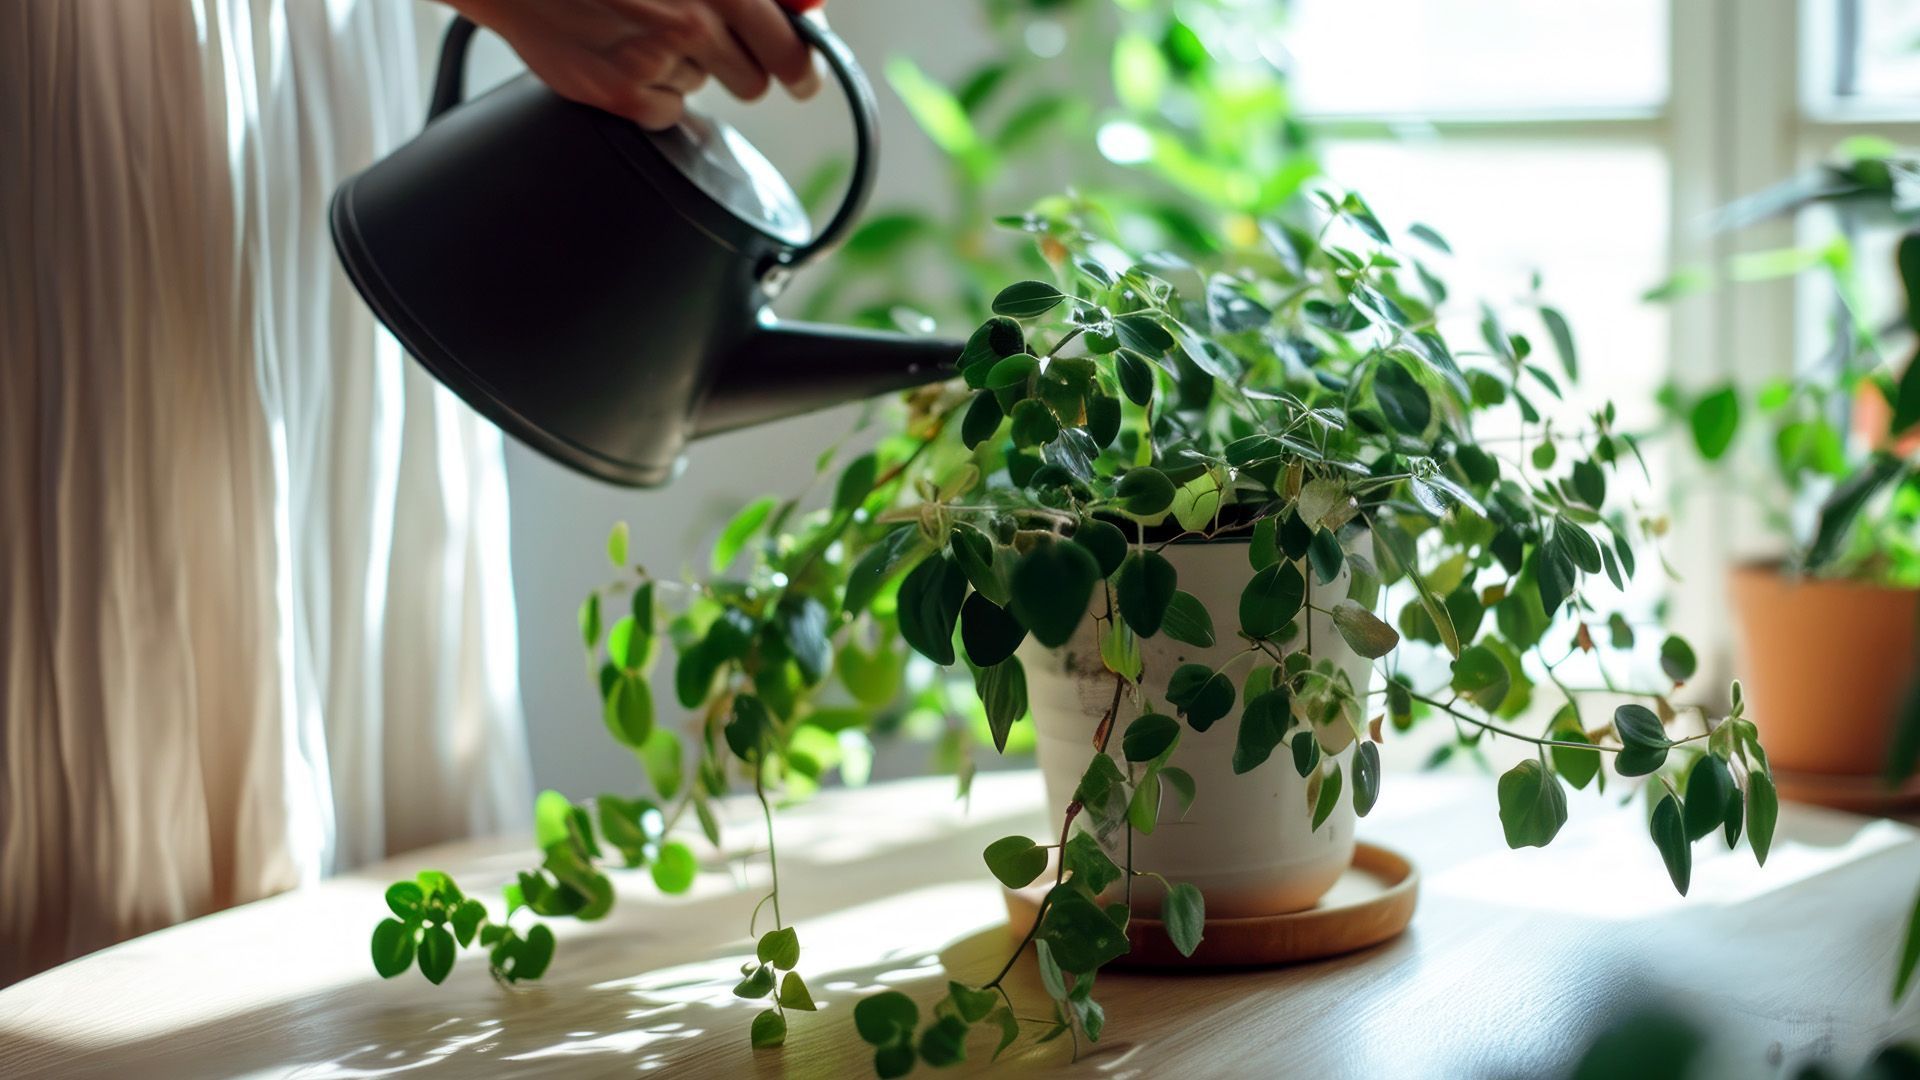 How to water your plants properly